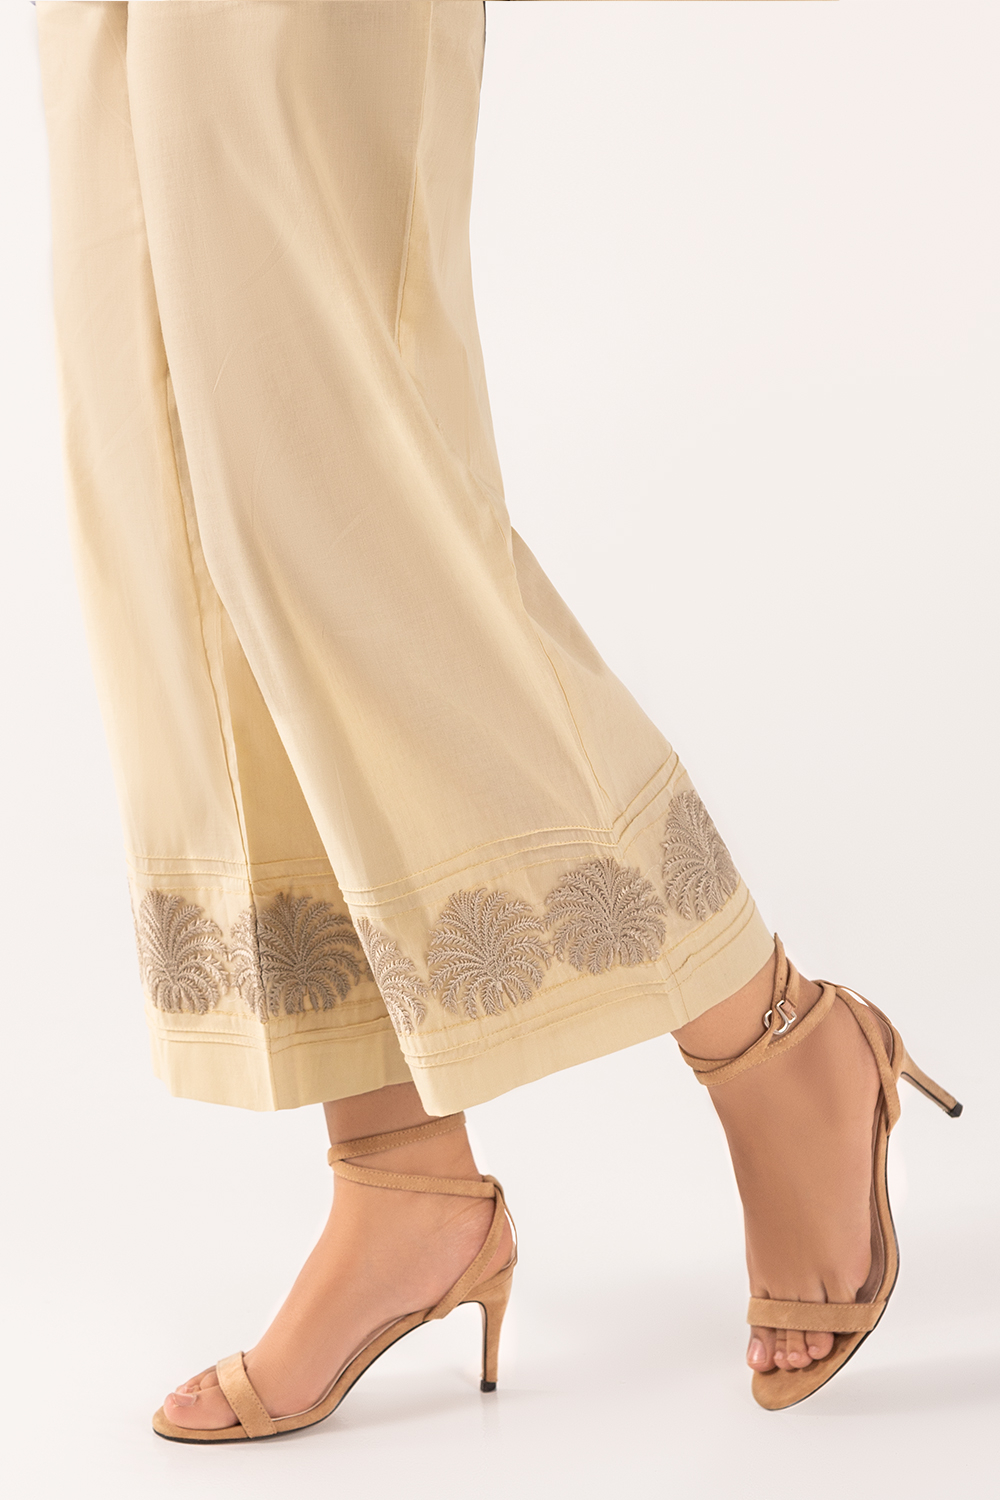 Beige Dyed & Embroidered Cambric Trouser TR-21-28